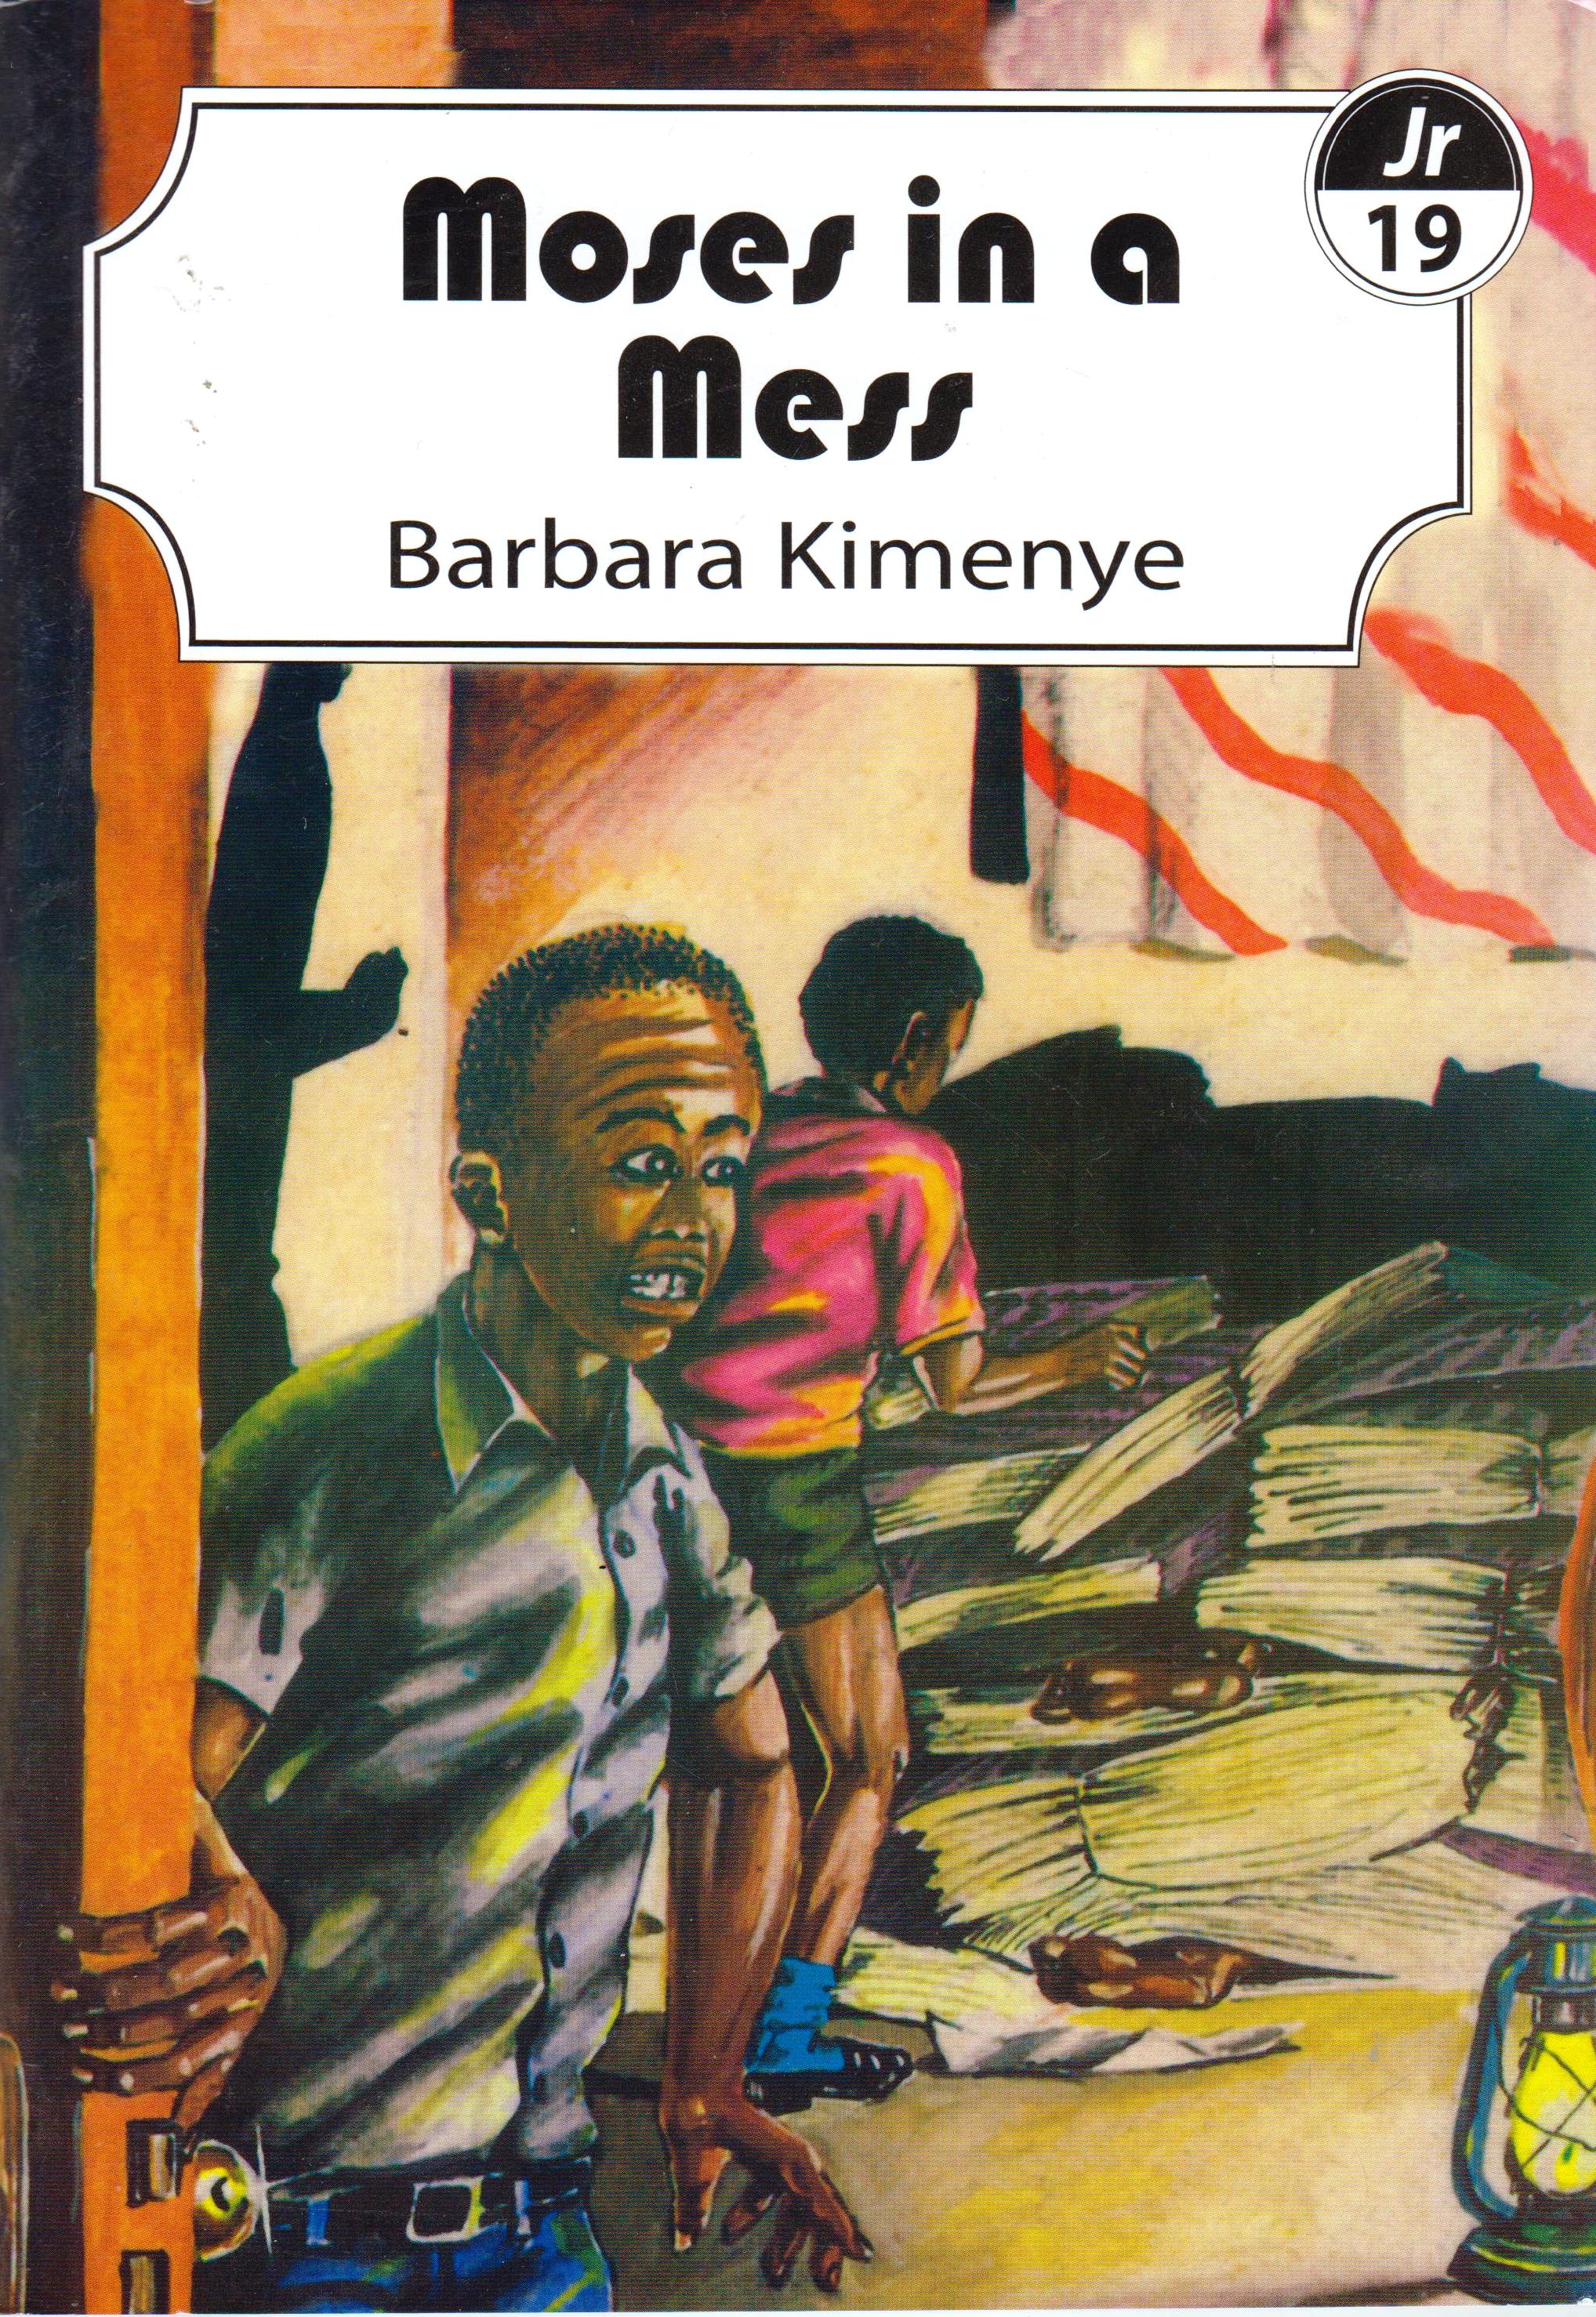 Moses in a Mess by Barbara Kimenye (Moses Book Series)